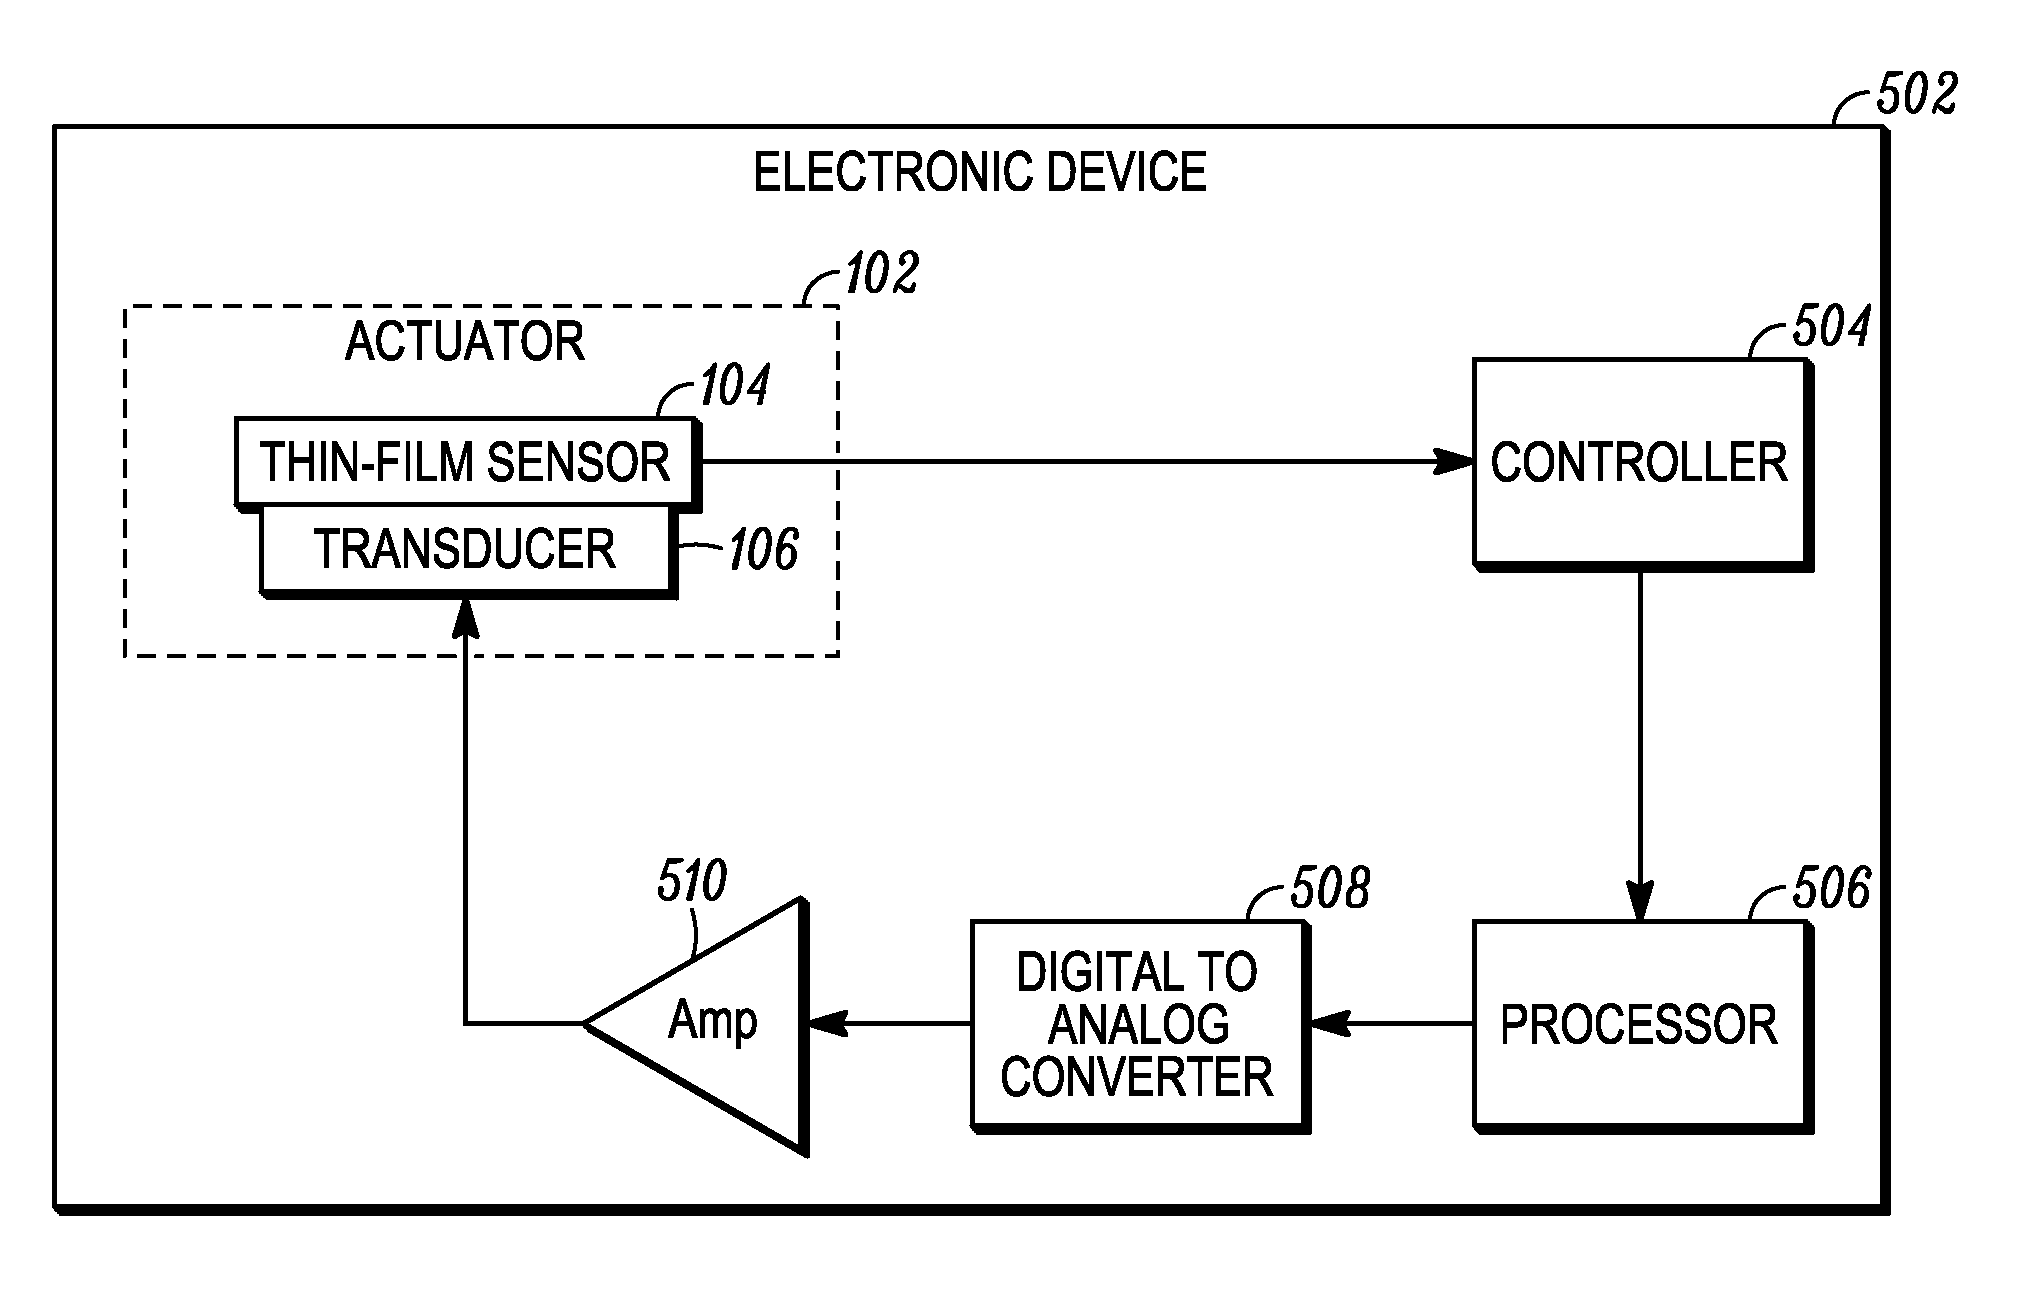 Electronic device with audio and haptic capability